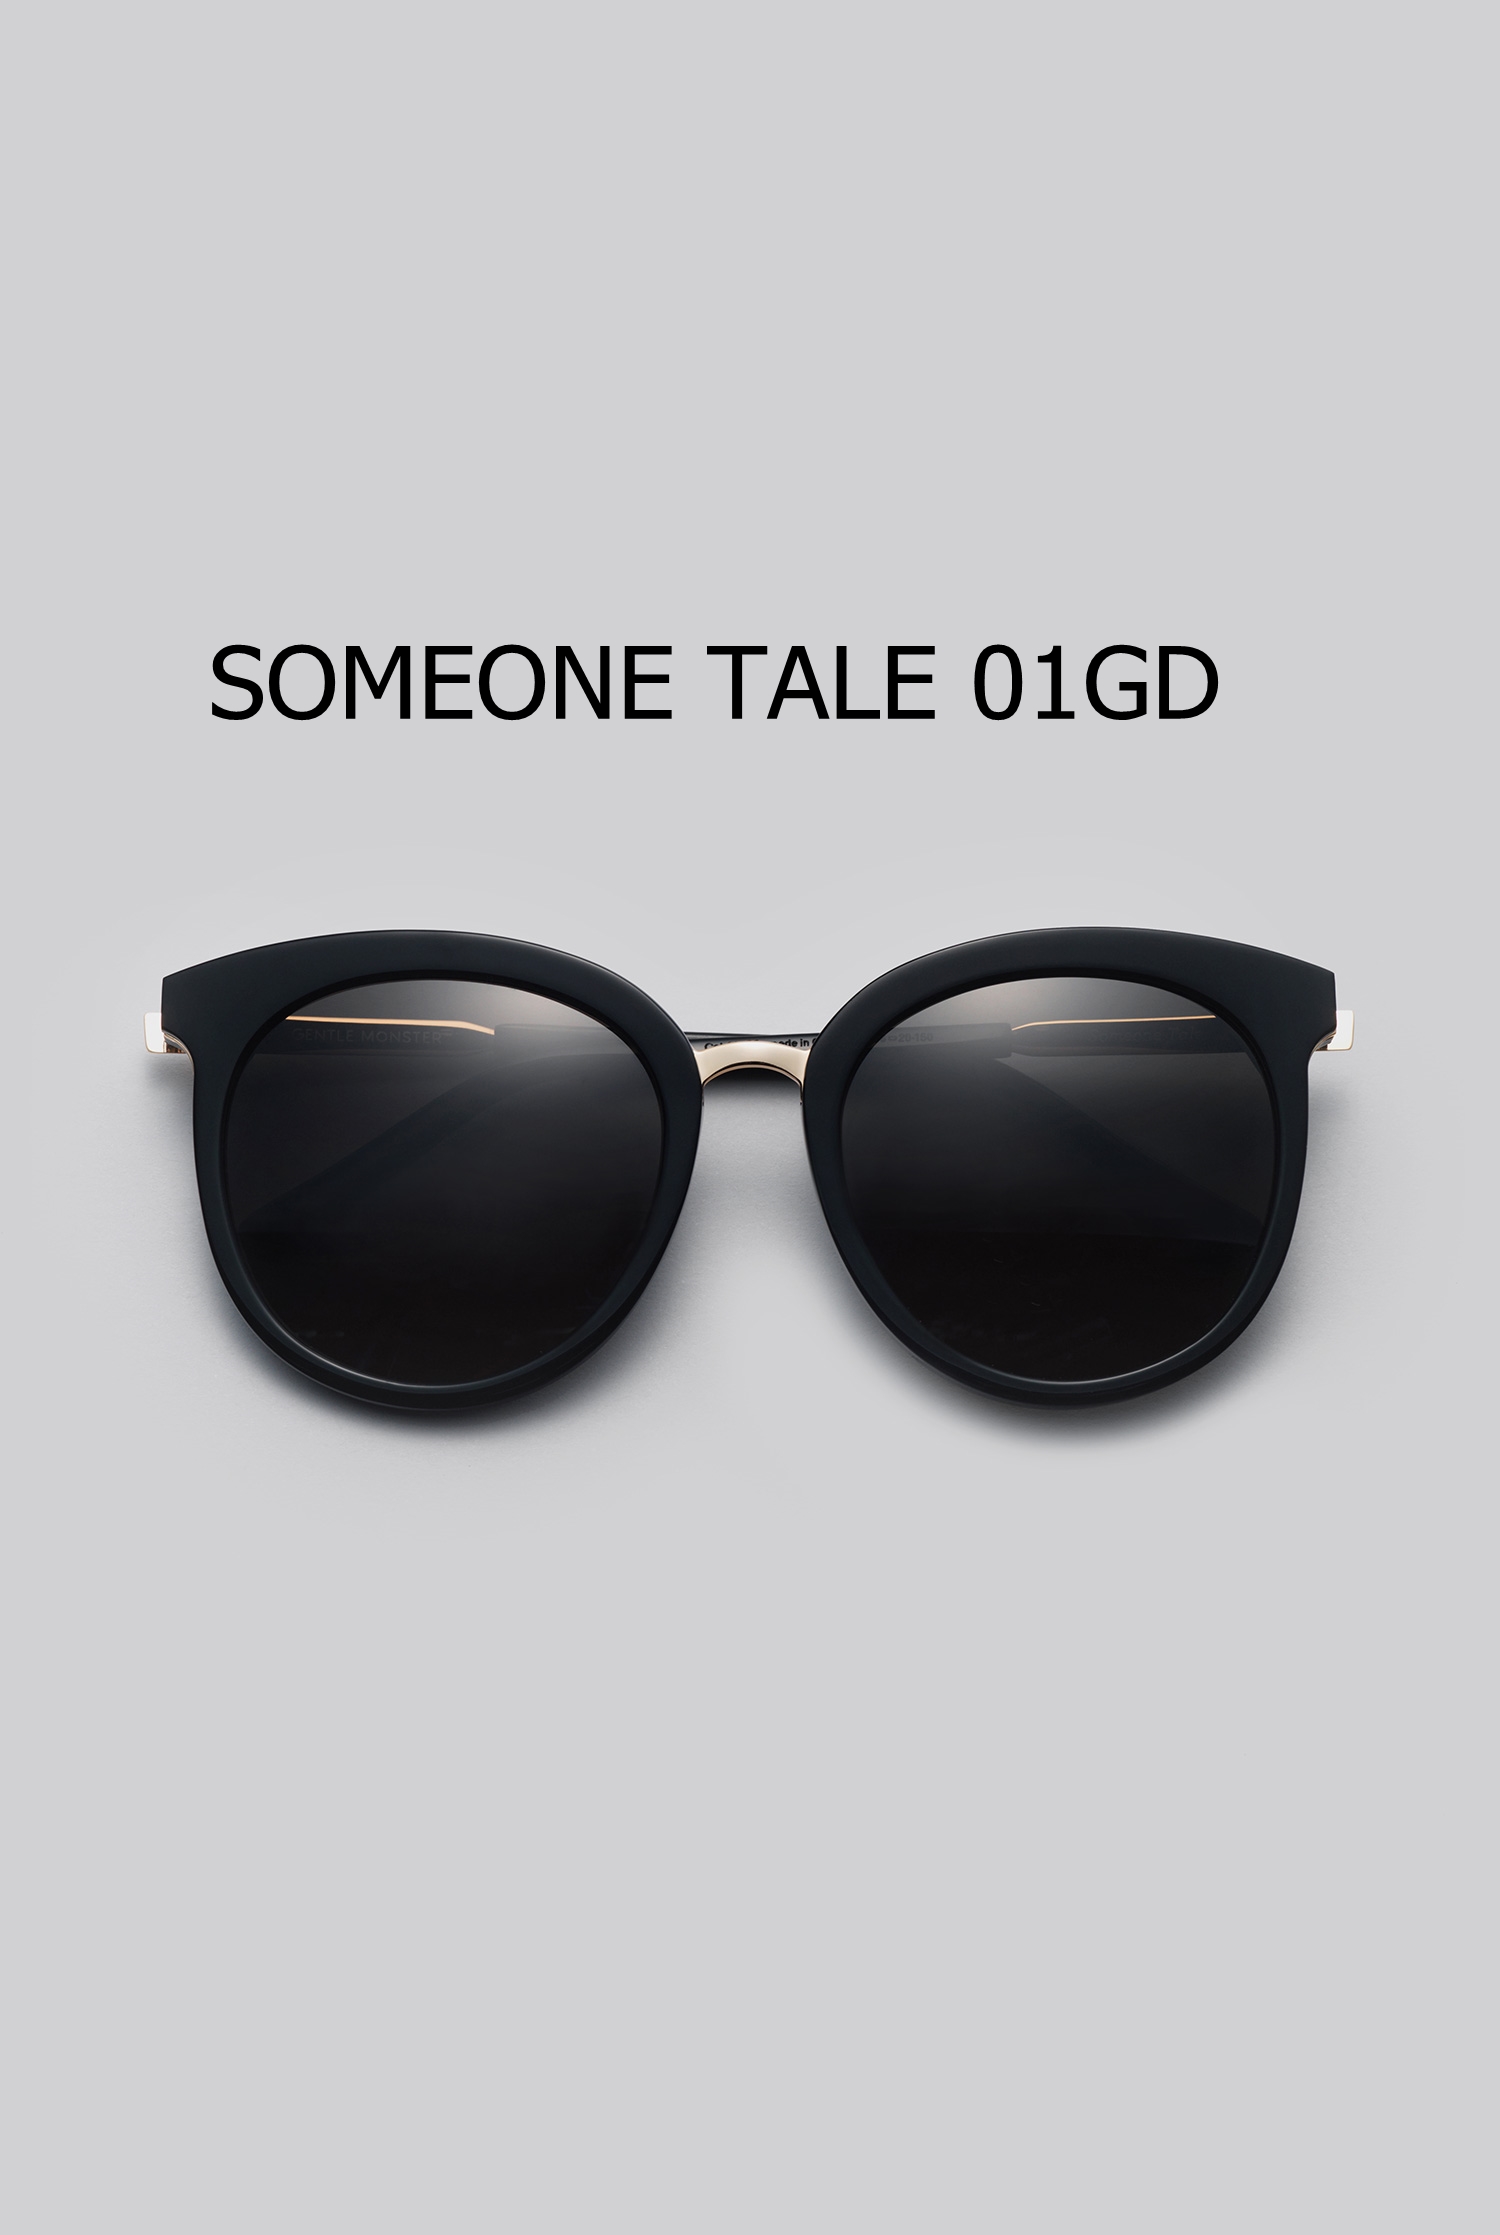 SOMEONE TALE 01GD